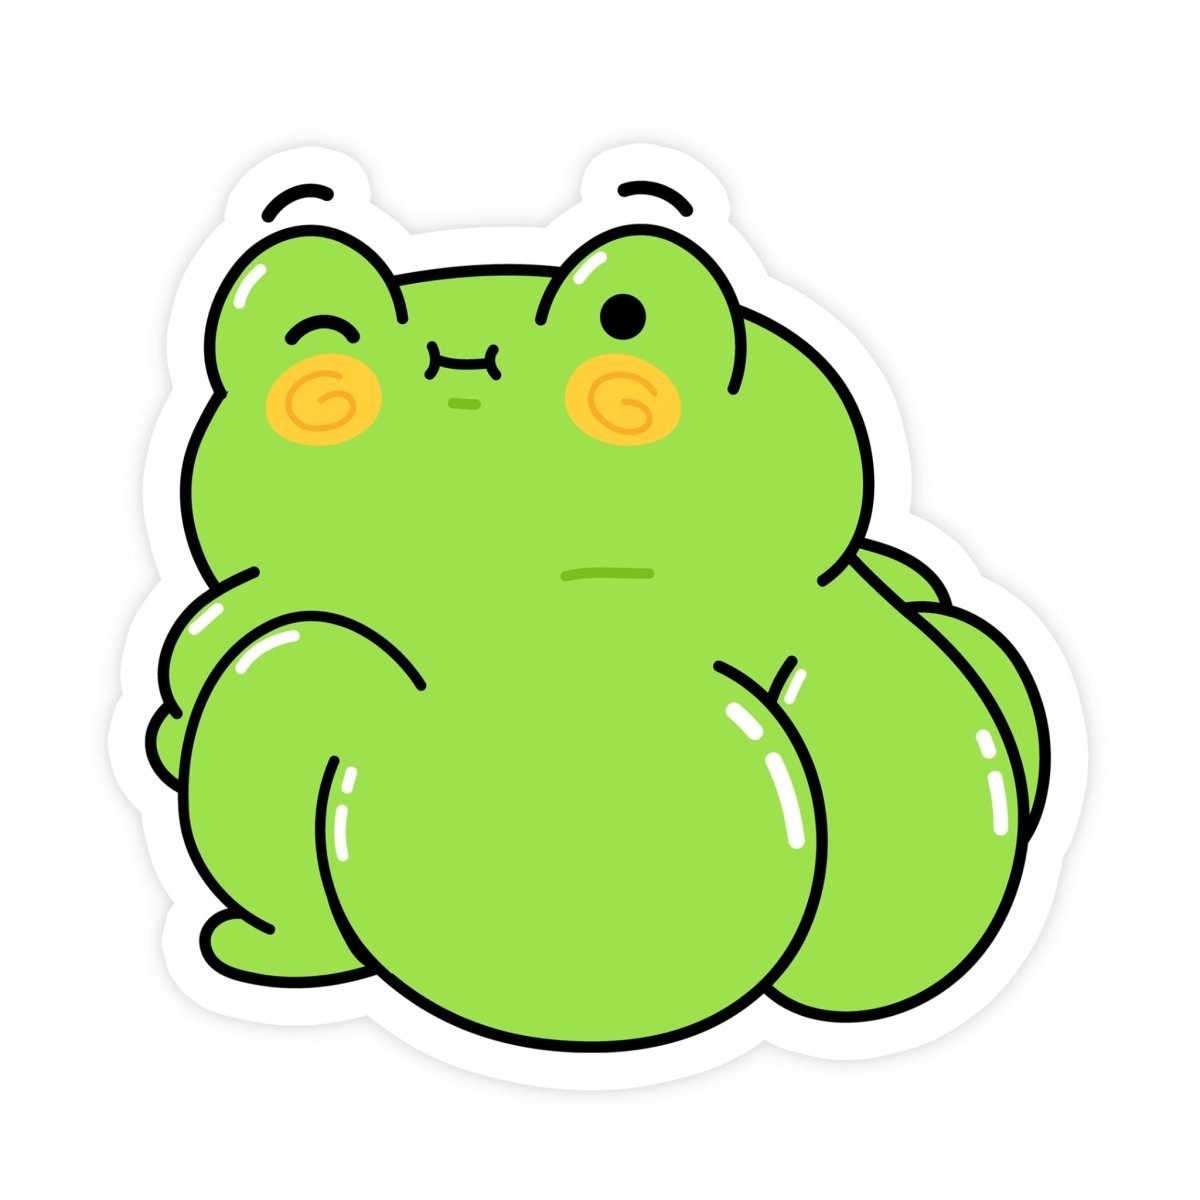 Big Booty Cute Thiccy Frog Meme Sticker - stickerbullBig Booty Cute Thiccy Frog Meme StickerRetail StickerstickerbullstickerbullTaylor_BootyFrog_2 [#196]Big Booty Cute Thiccy Frog Meme Sticker